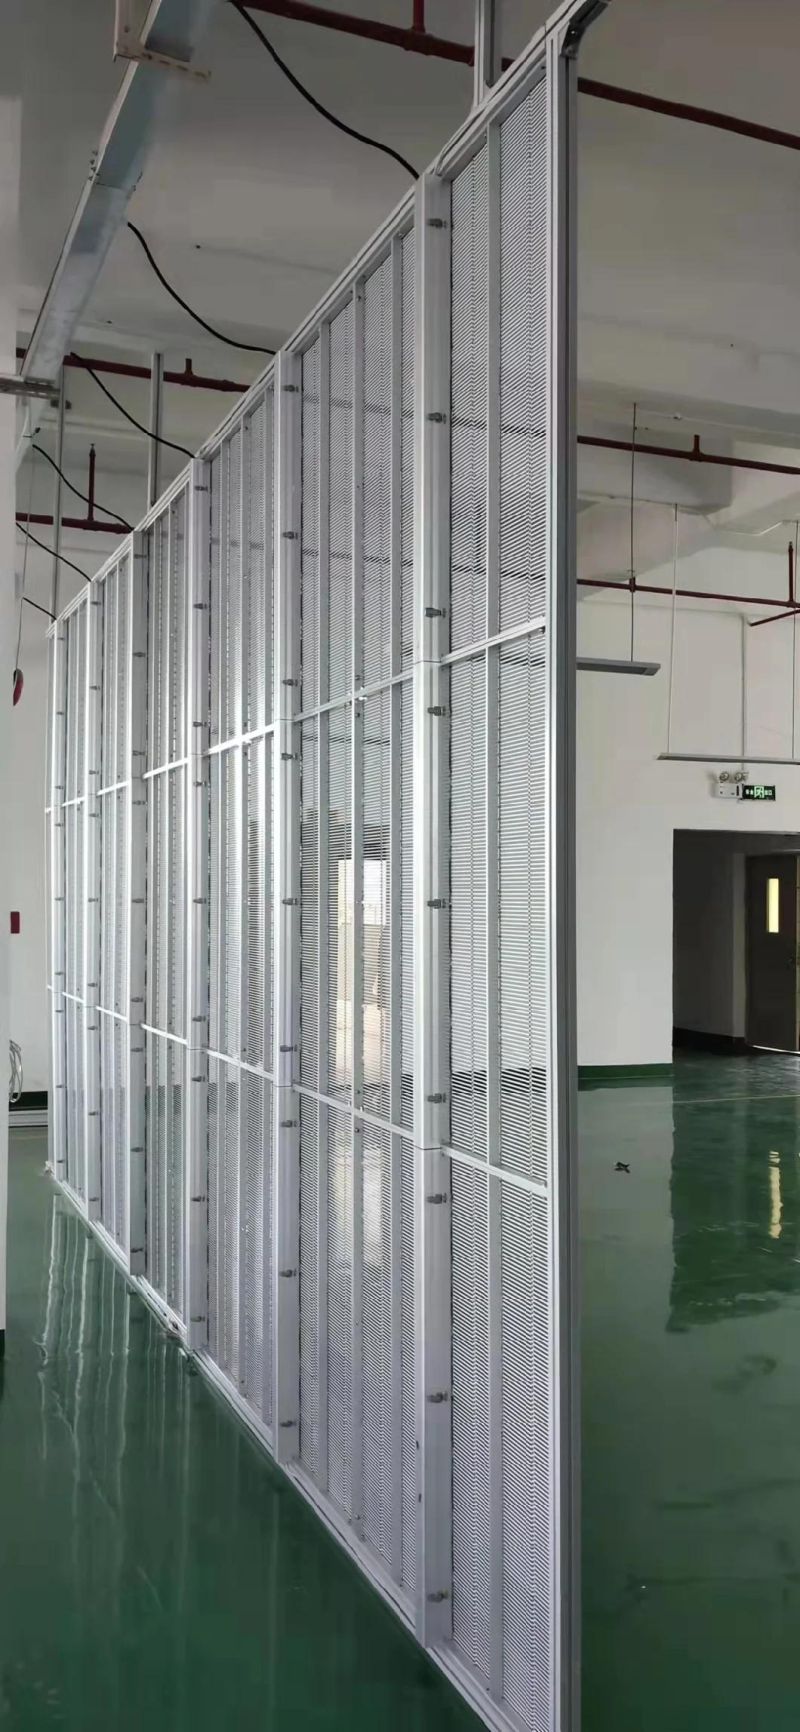 P3.9-7.8 Transparent LED Display Panel for Window Commerical Adertisement